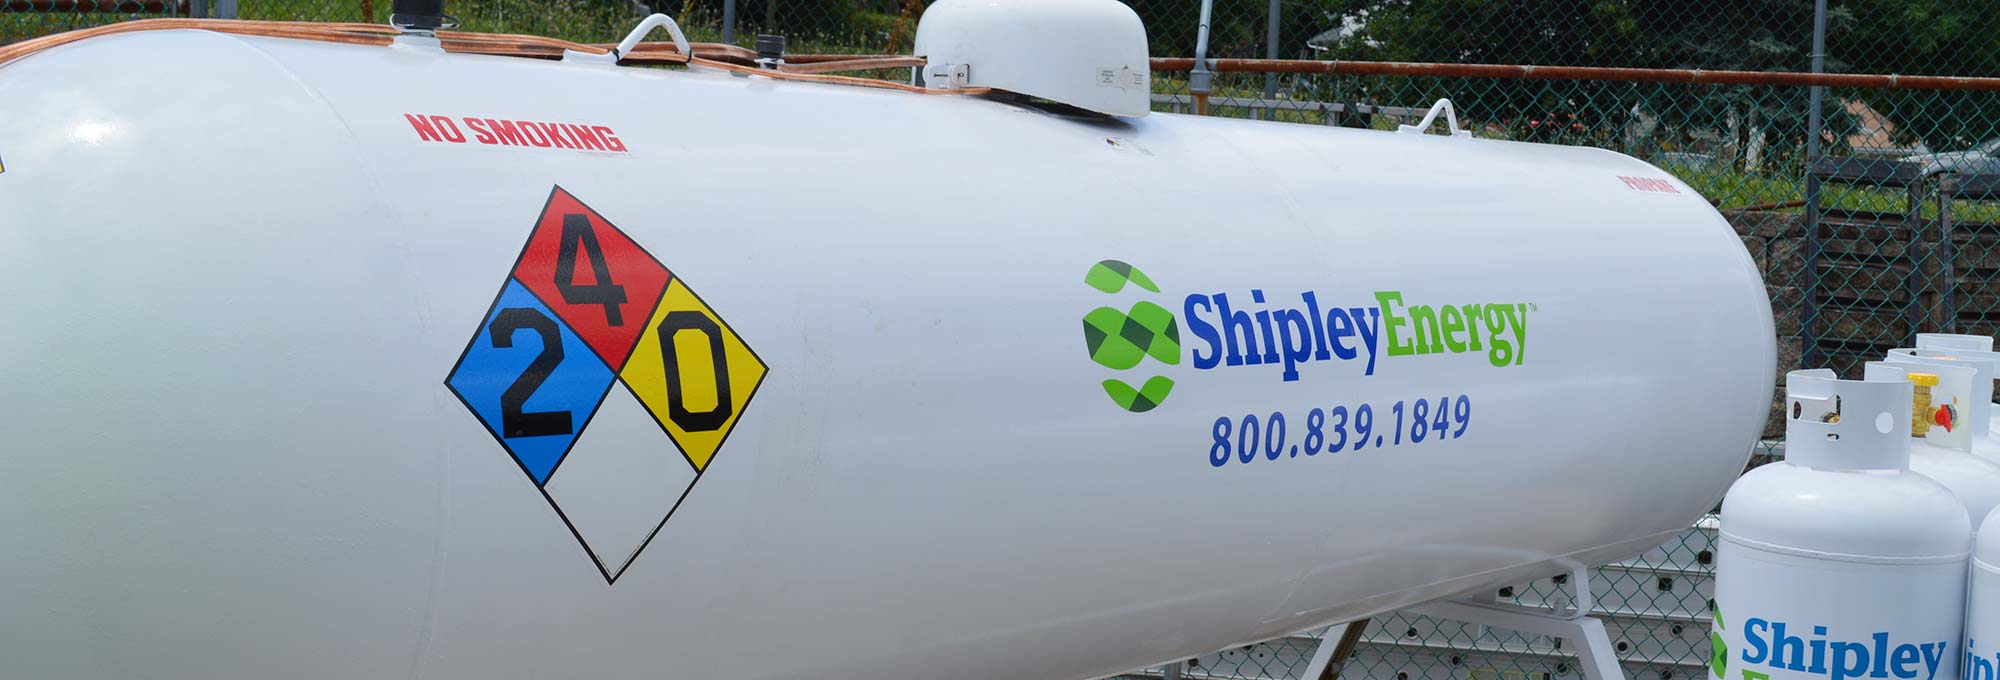 Commercial Propane Supplier